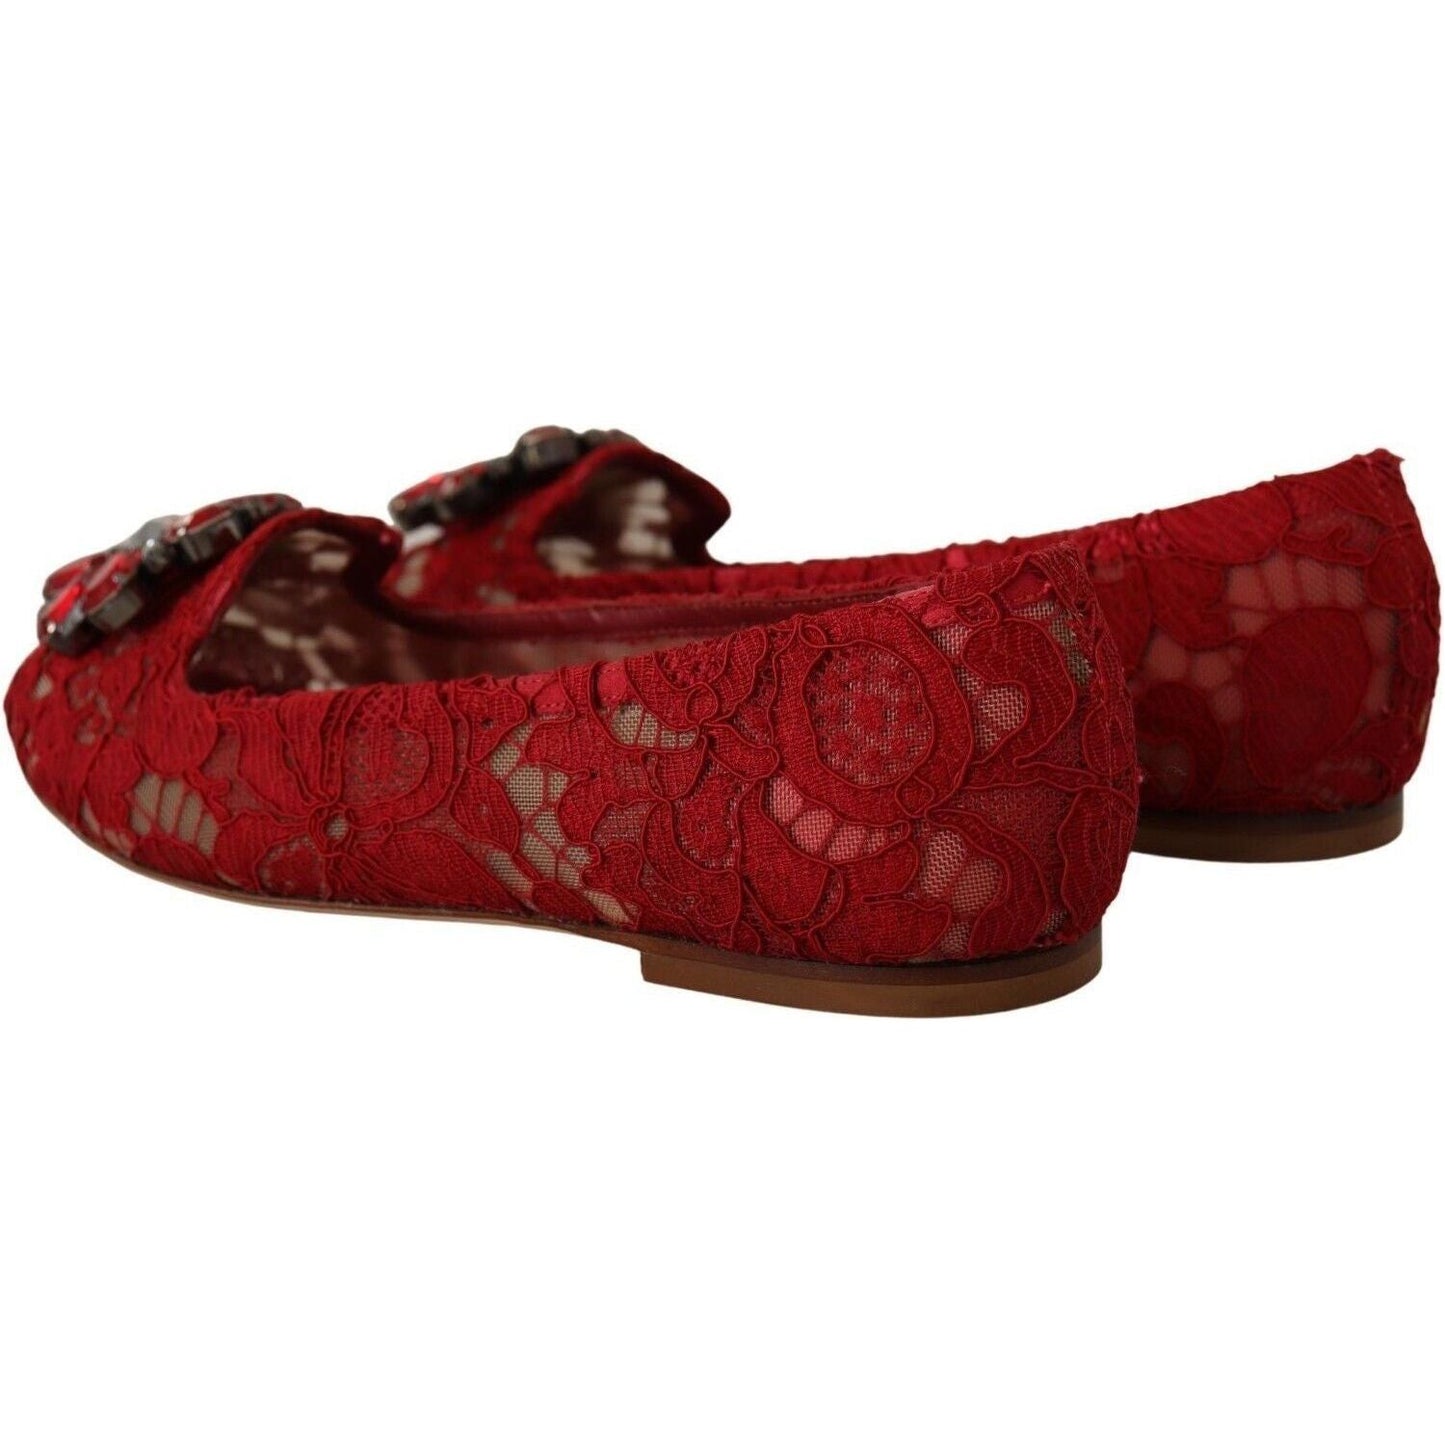 Dolce & Gabbana Radiant Red Lace Ballet Flats with Crystal Buckle red-lace-crystal-ballet-flats-loafers-shoes s-l1600-10-30-28fd90f0-7eb.jpg